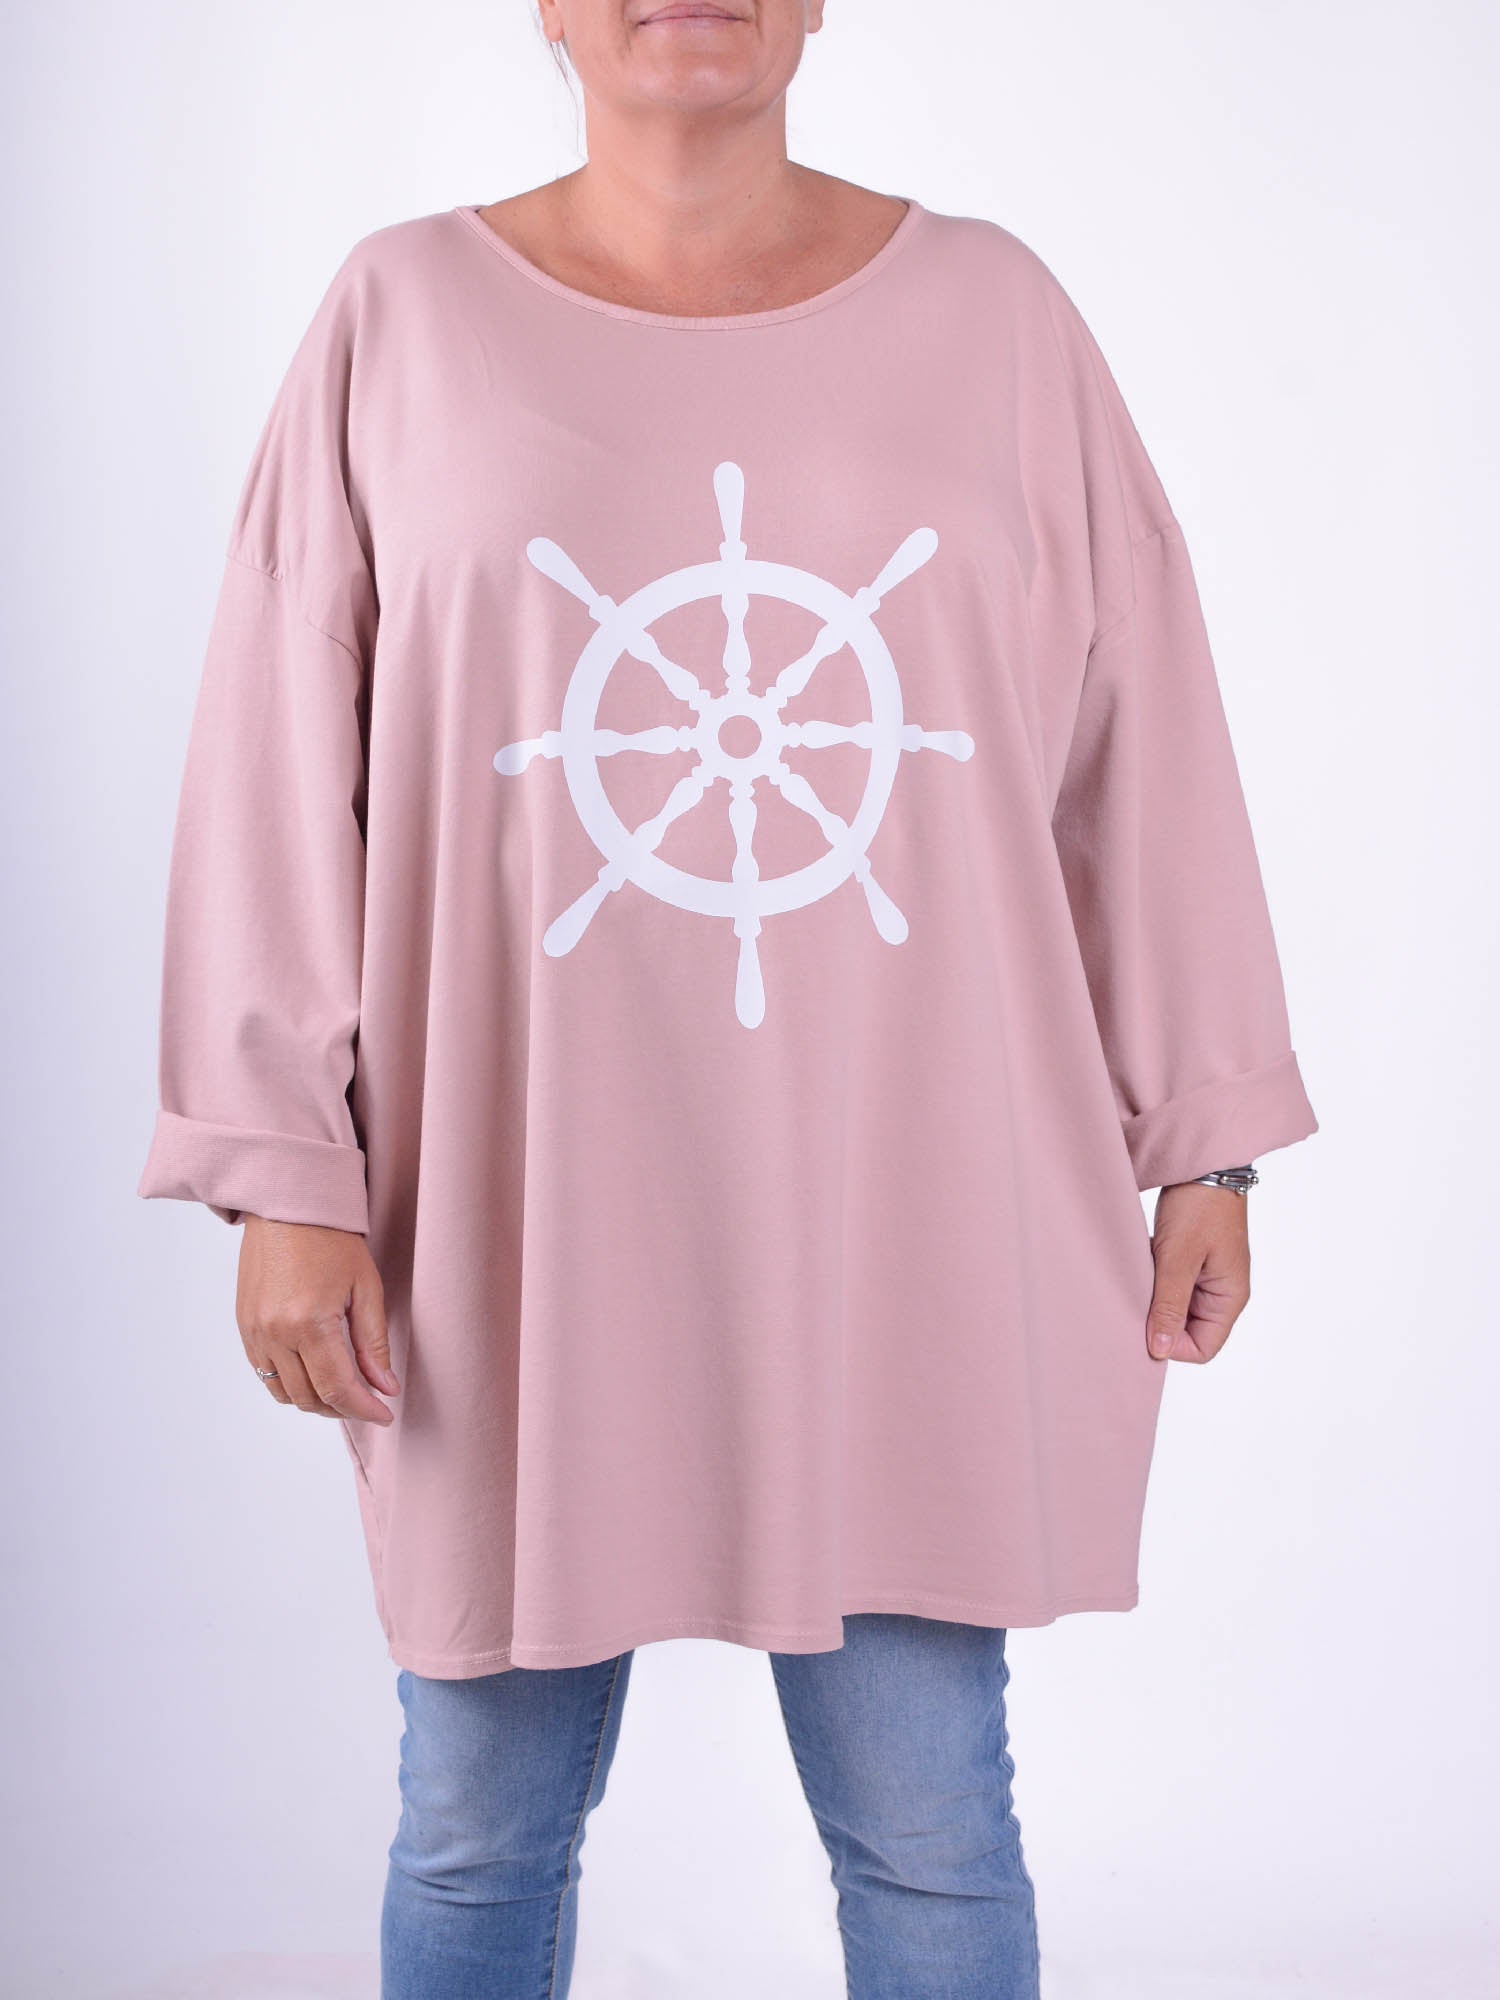 Basic Oversized Top with Nautical Wheel Print - 9482 Wheel, Tops & Shirts, Pure Plus Clothing, Lagenlook Clothing, Plus Size Fashion, Over 50 Fashion